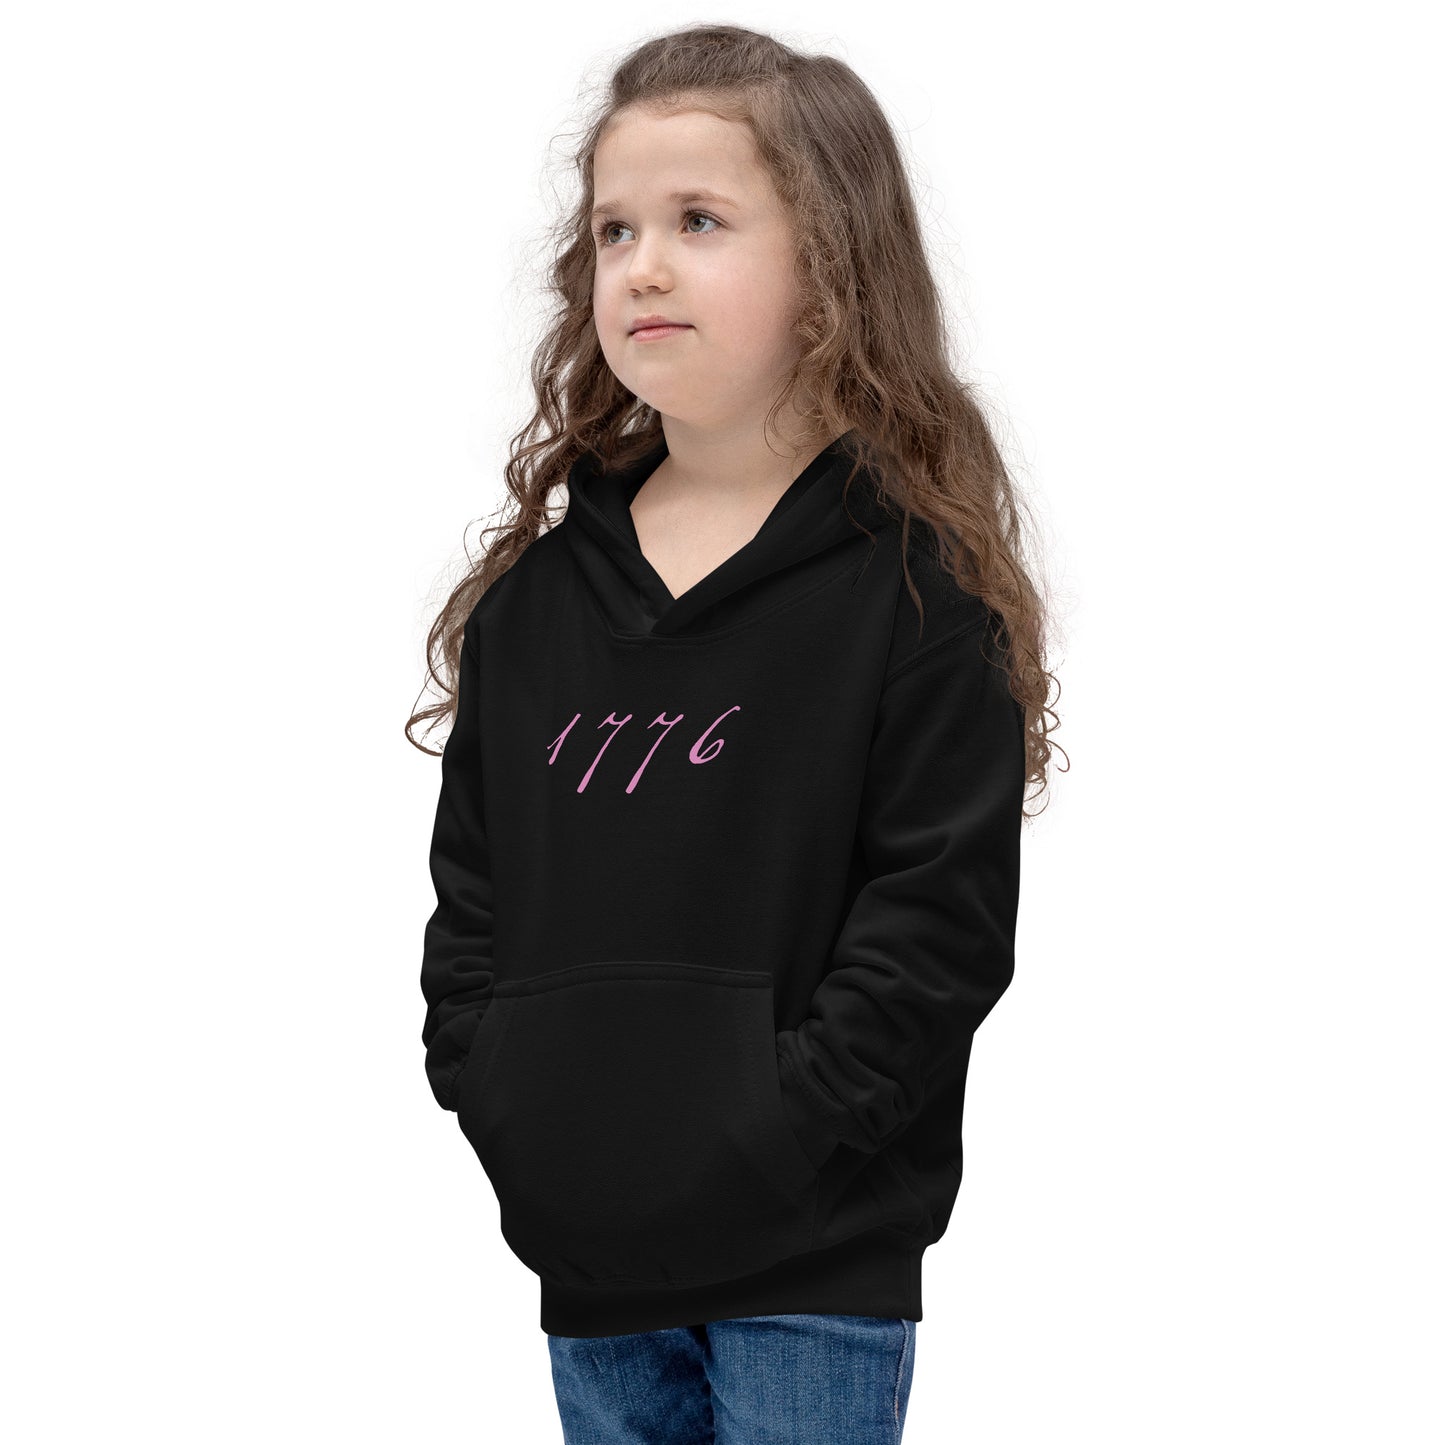 YOUTH - WE THE PEOPLE FLAG HOODIE - PINK CAMO EDITION